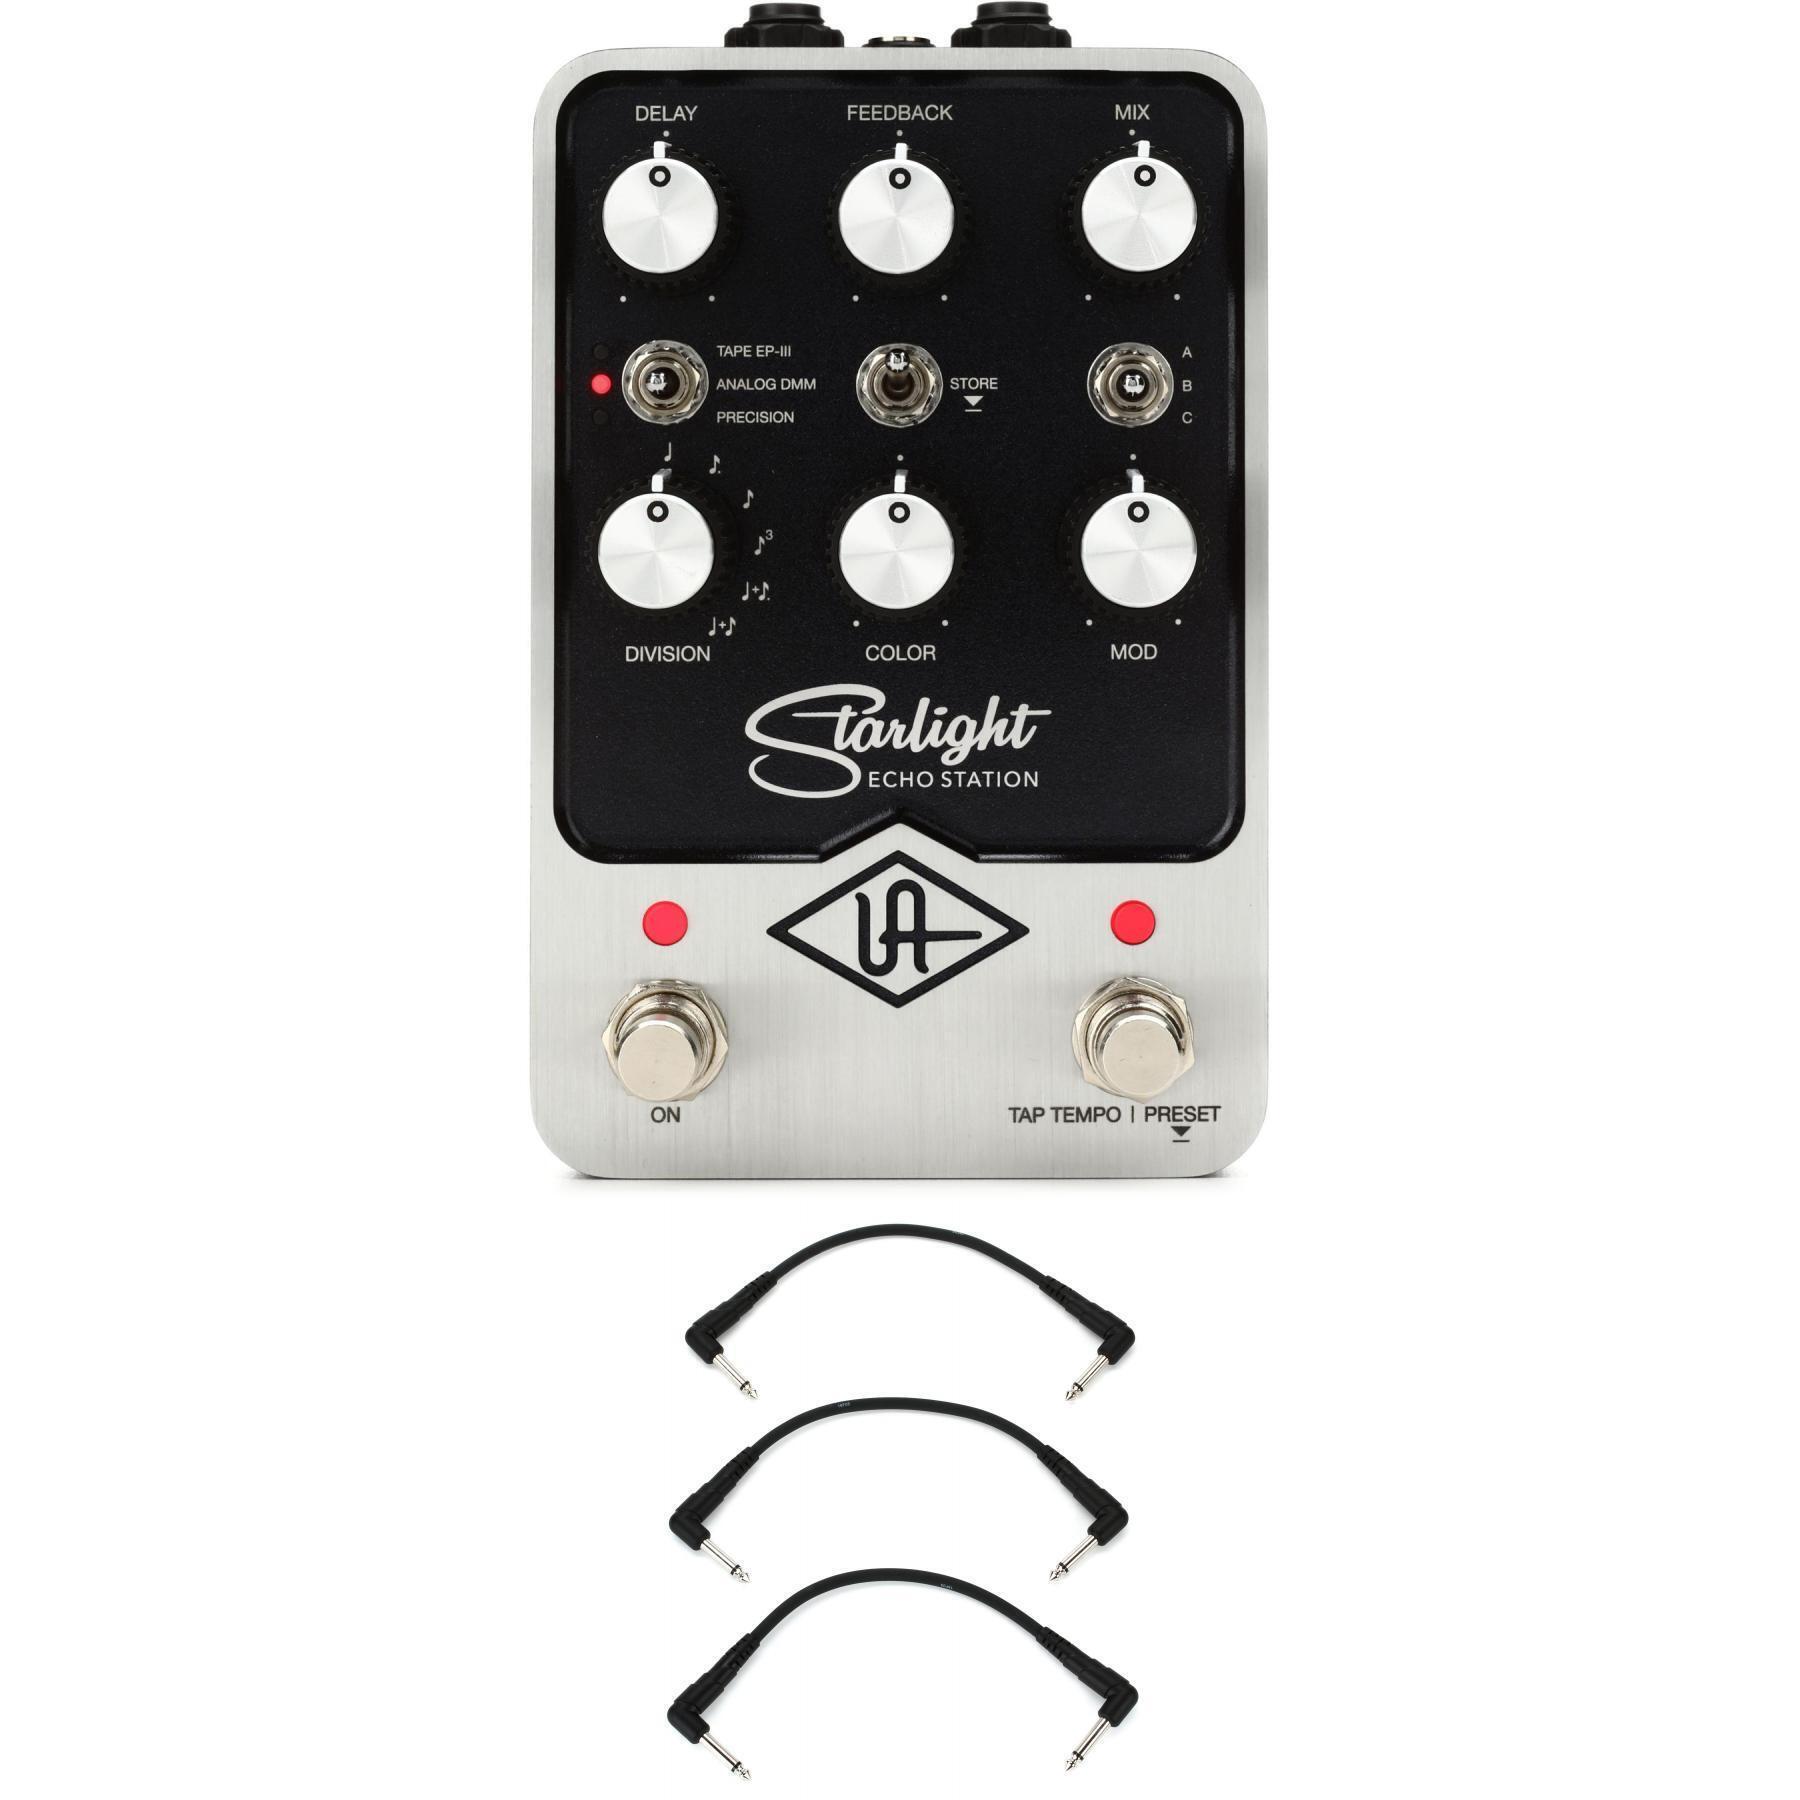 Universal Audio UAFX Starlight Echo Station Delay Pedal with 3 Patch Cables